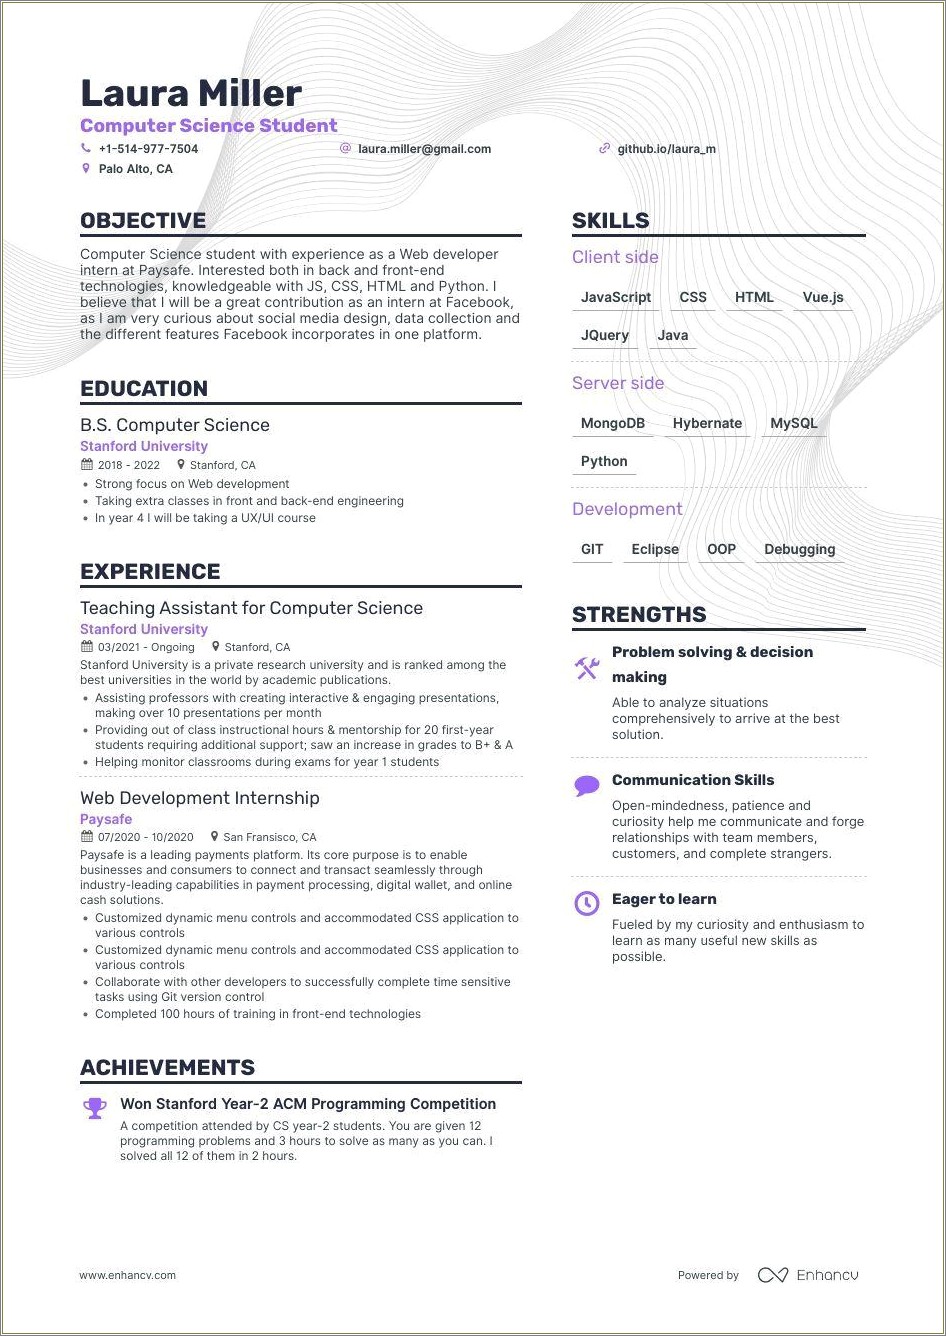 Resume Restaurant Server If You Have No Experience